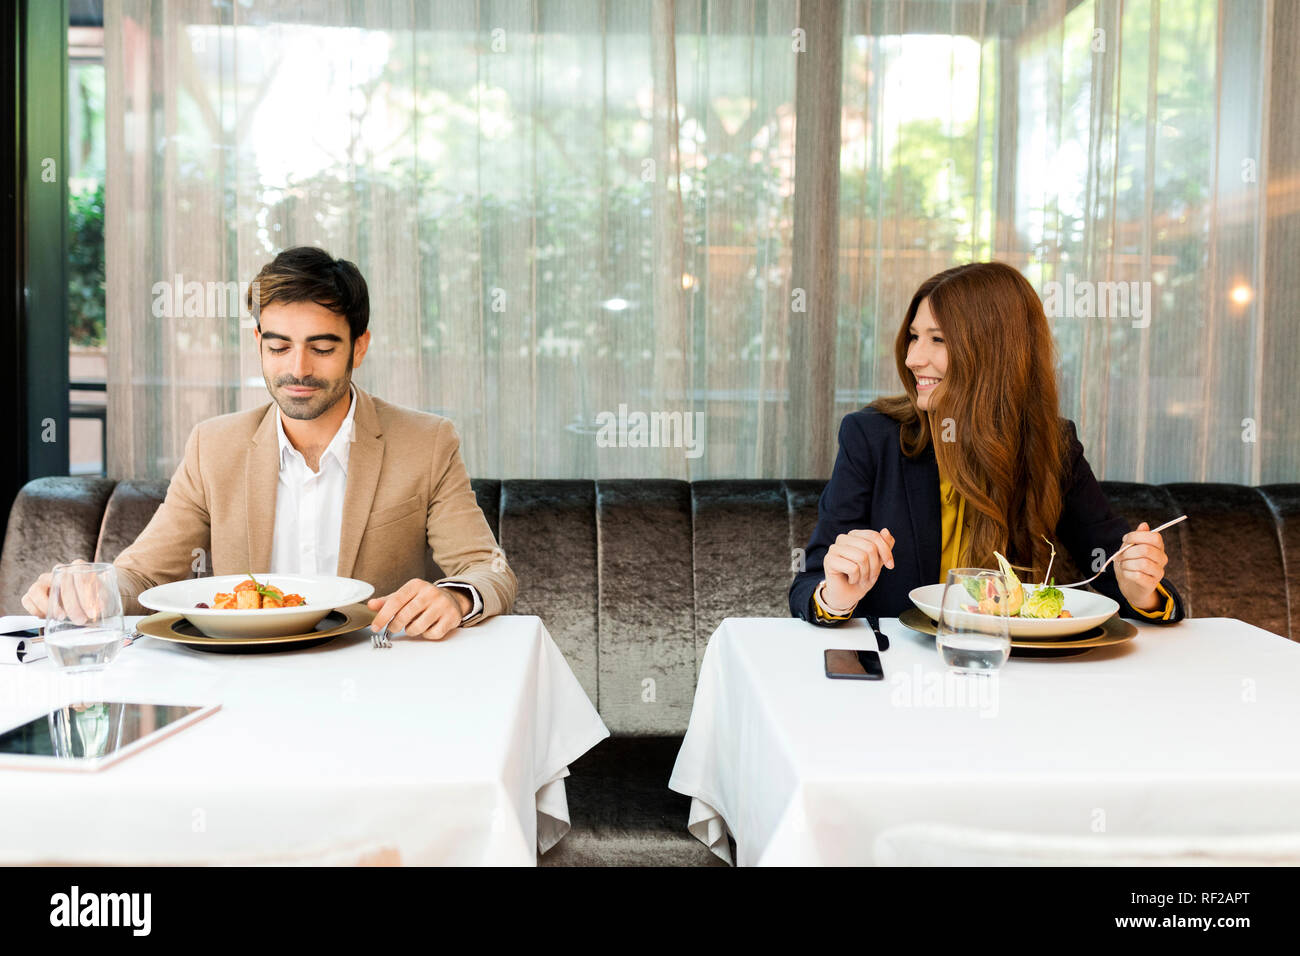 Smiling woman looking at man in a restaurant Banque D'Images